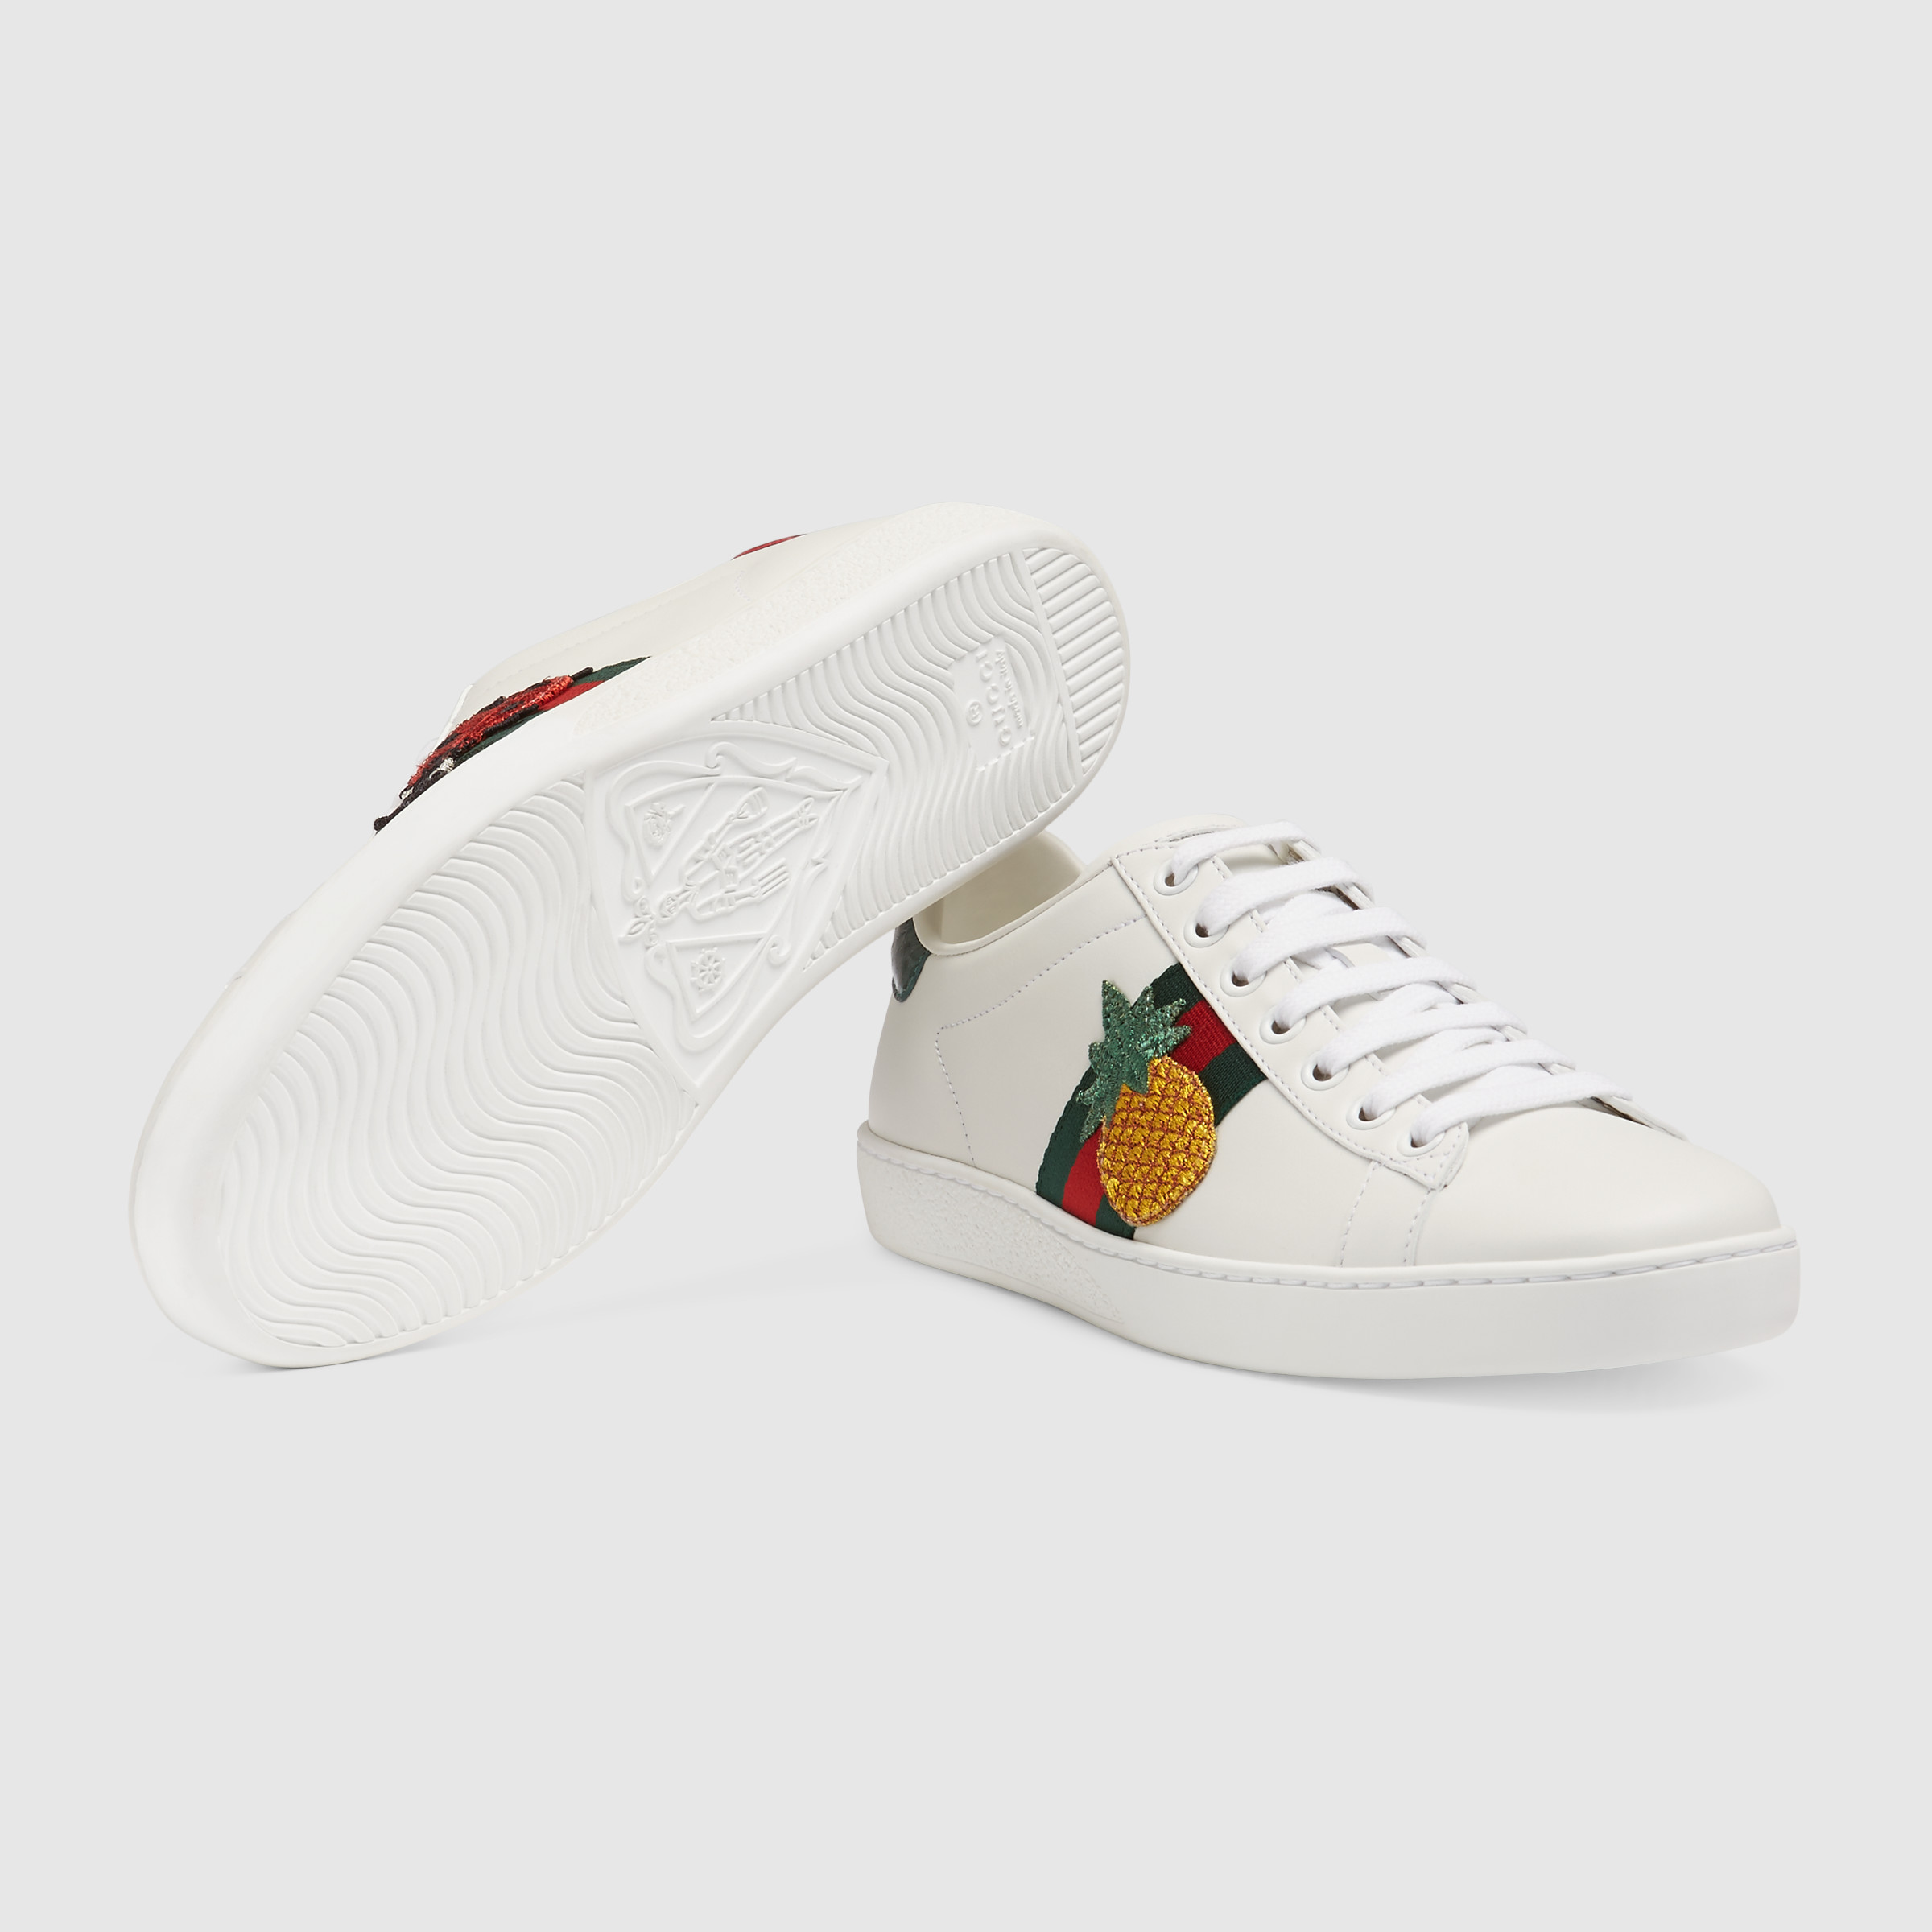 GIÀY GUCCI - ACE EMBROIDERED SNEAKER - LOGO PINEAPPLE